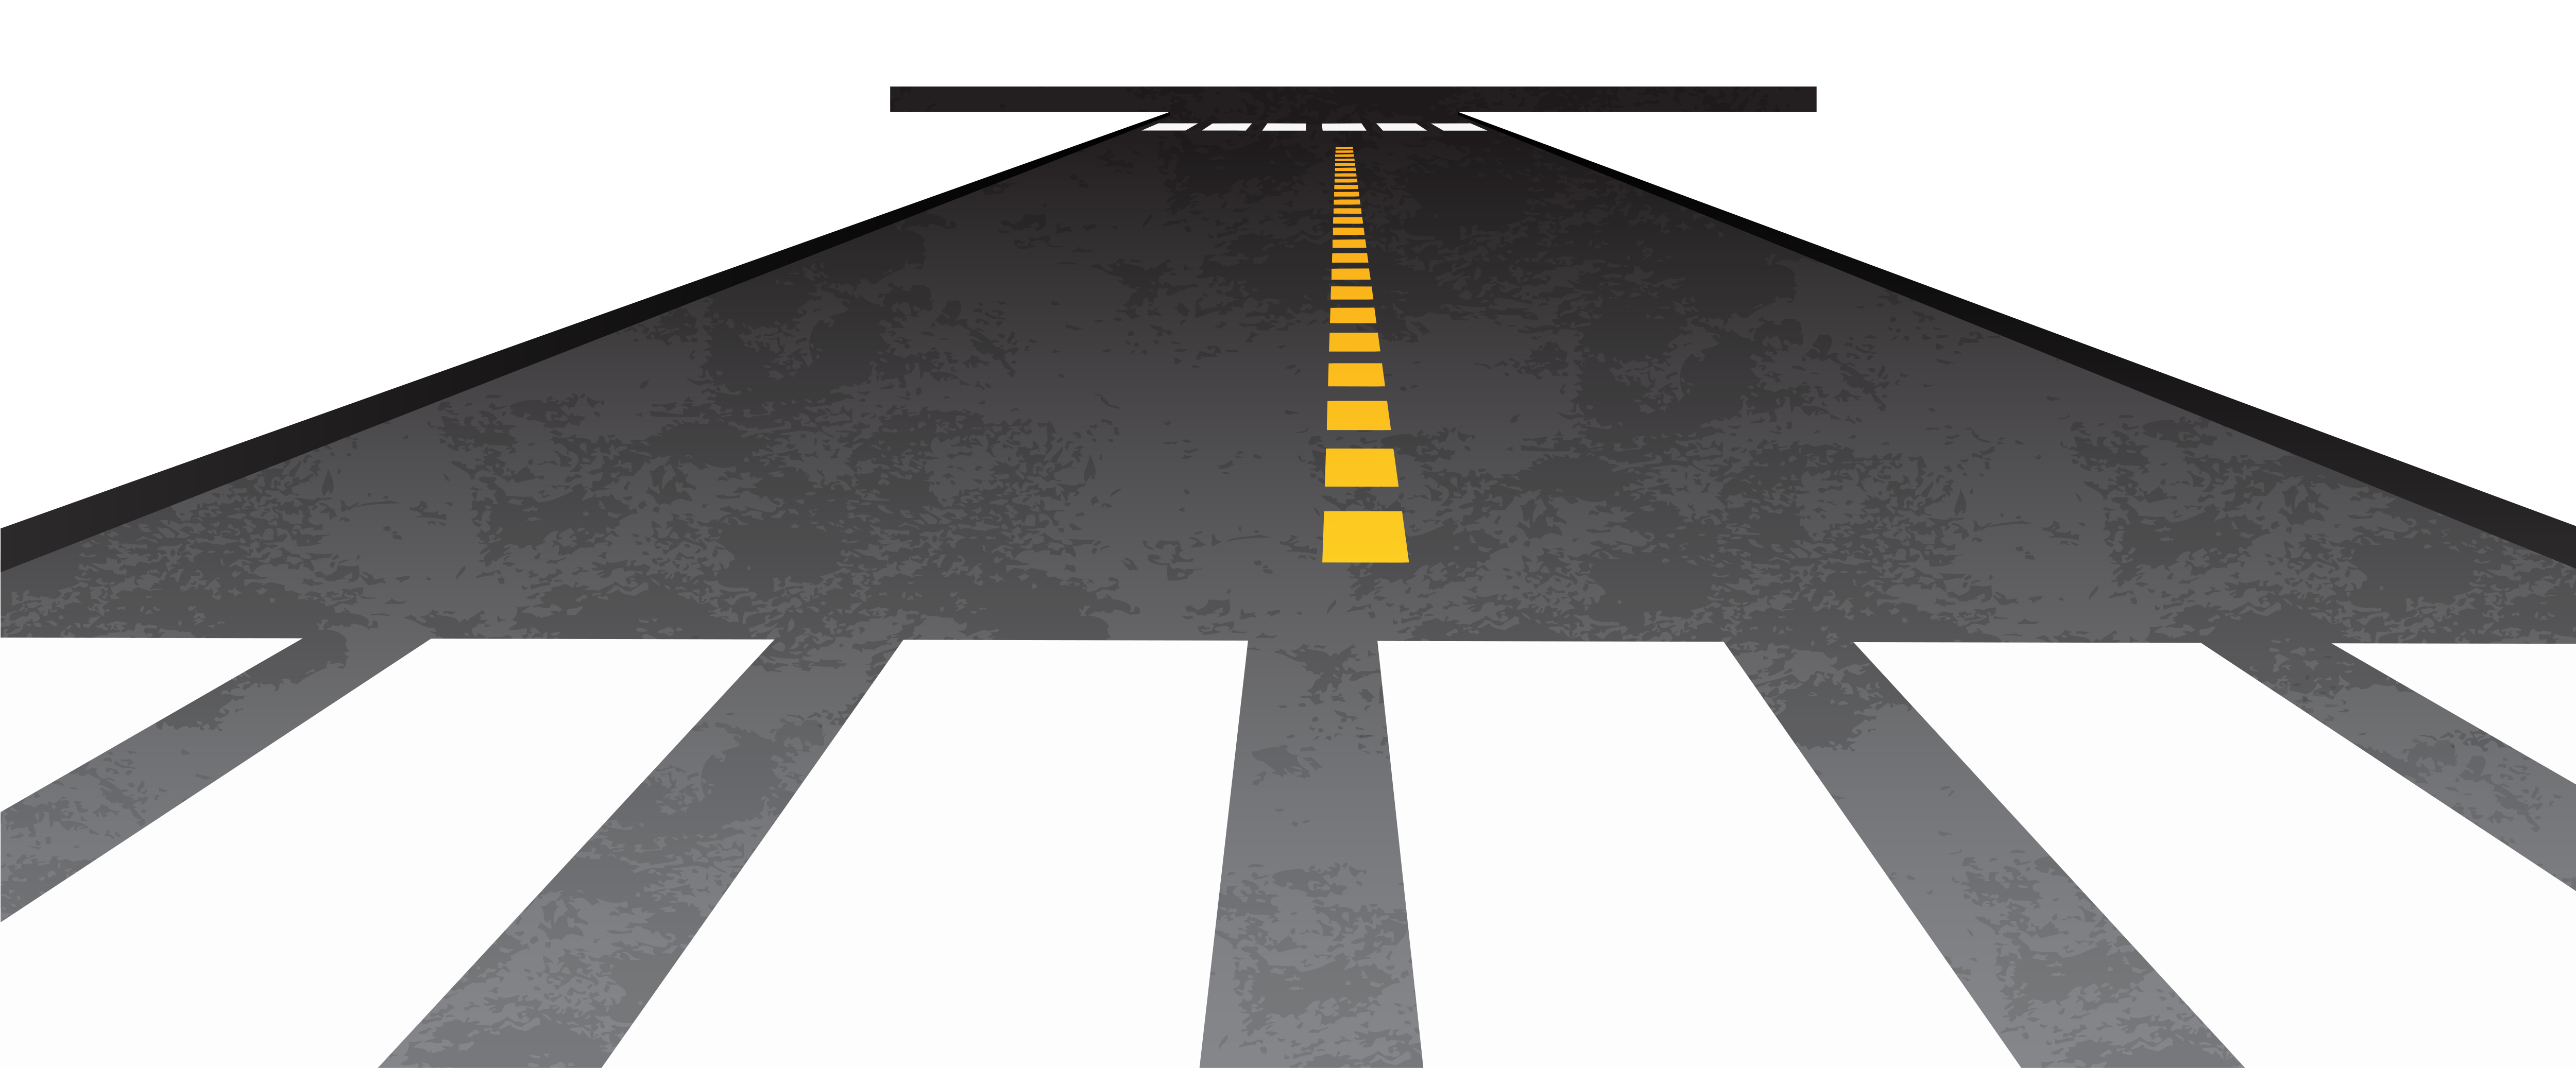 Png images download. Highway clipart smooth road